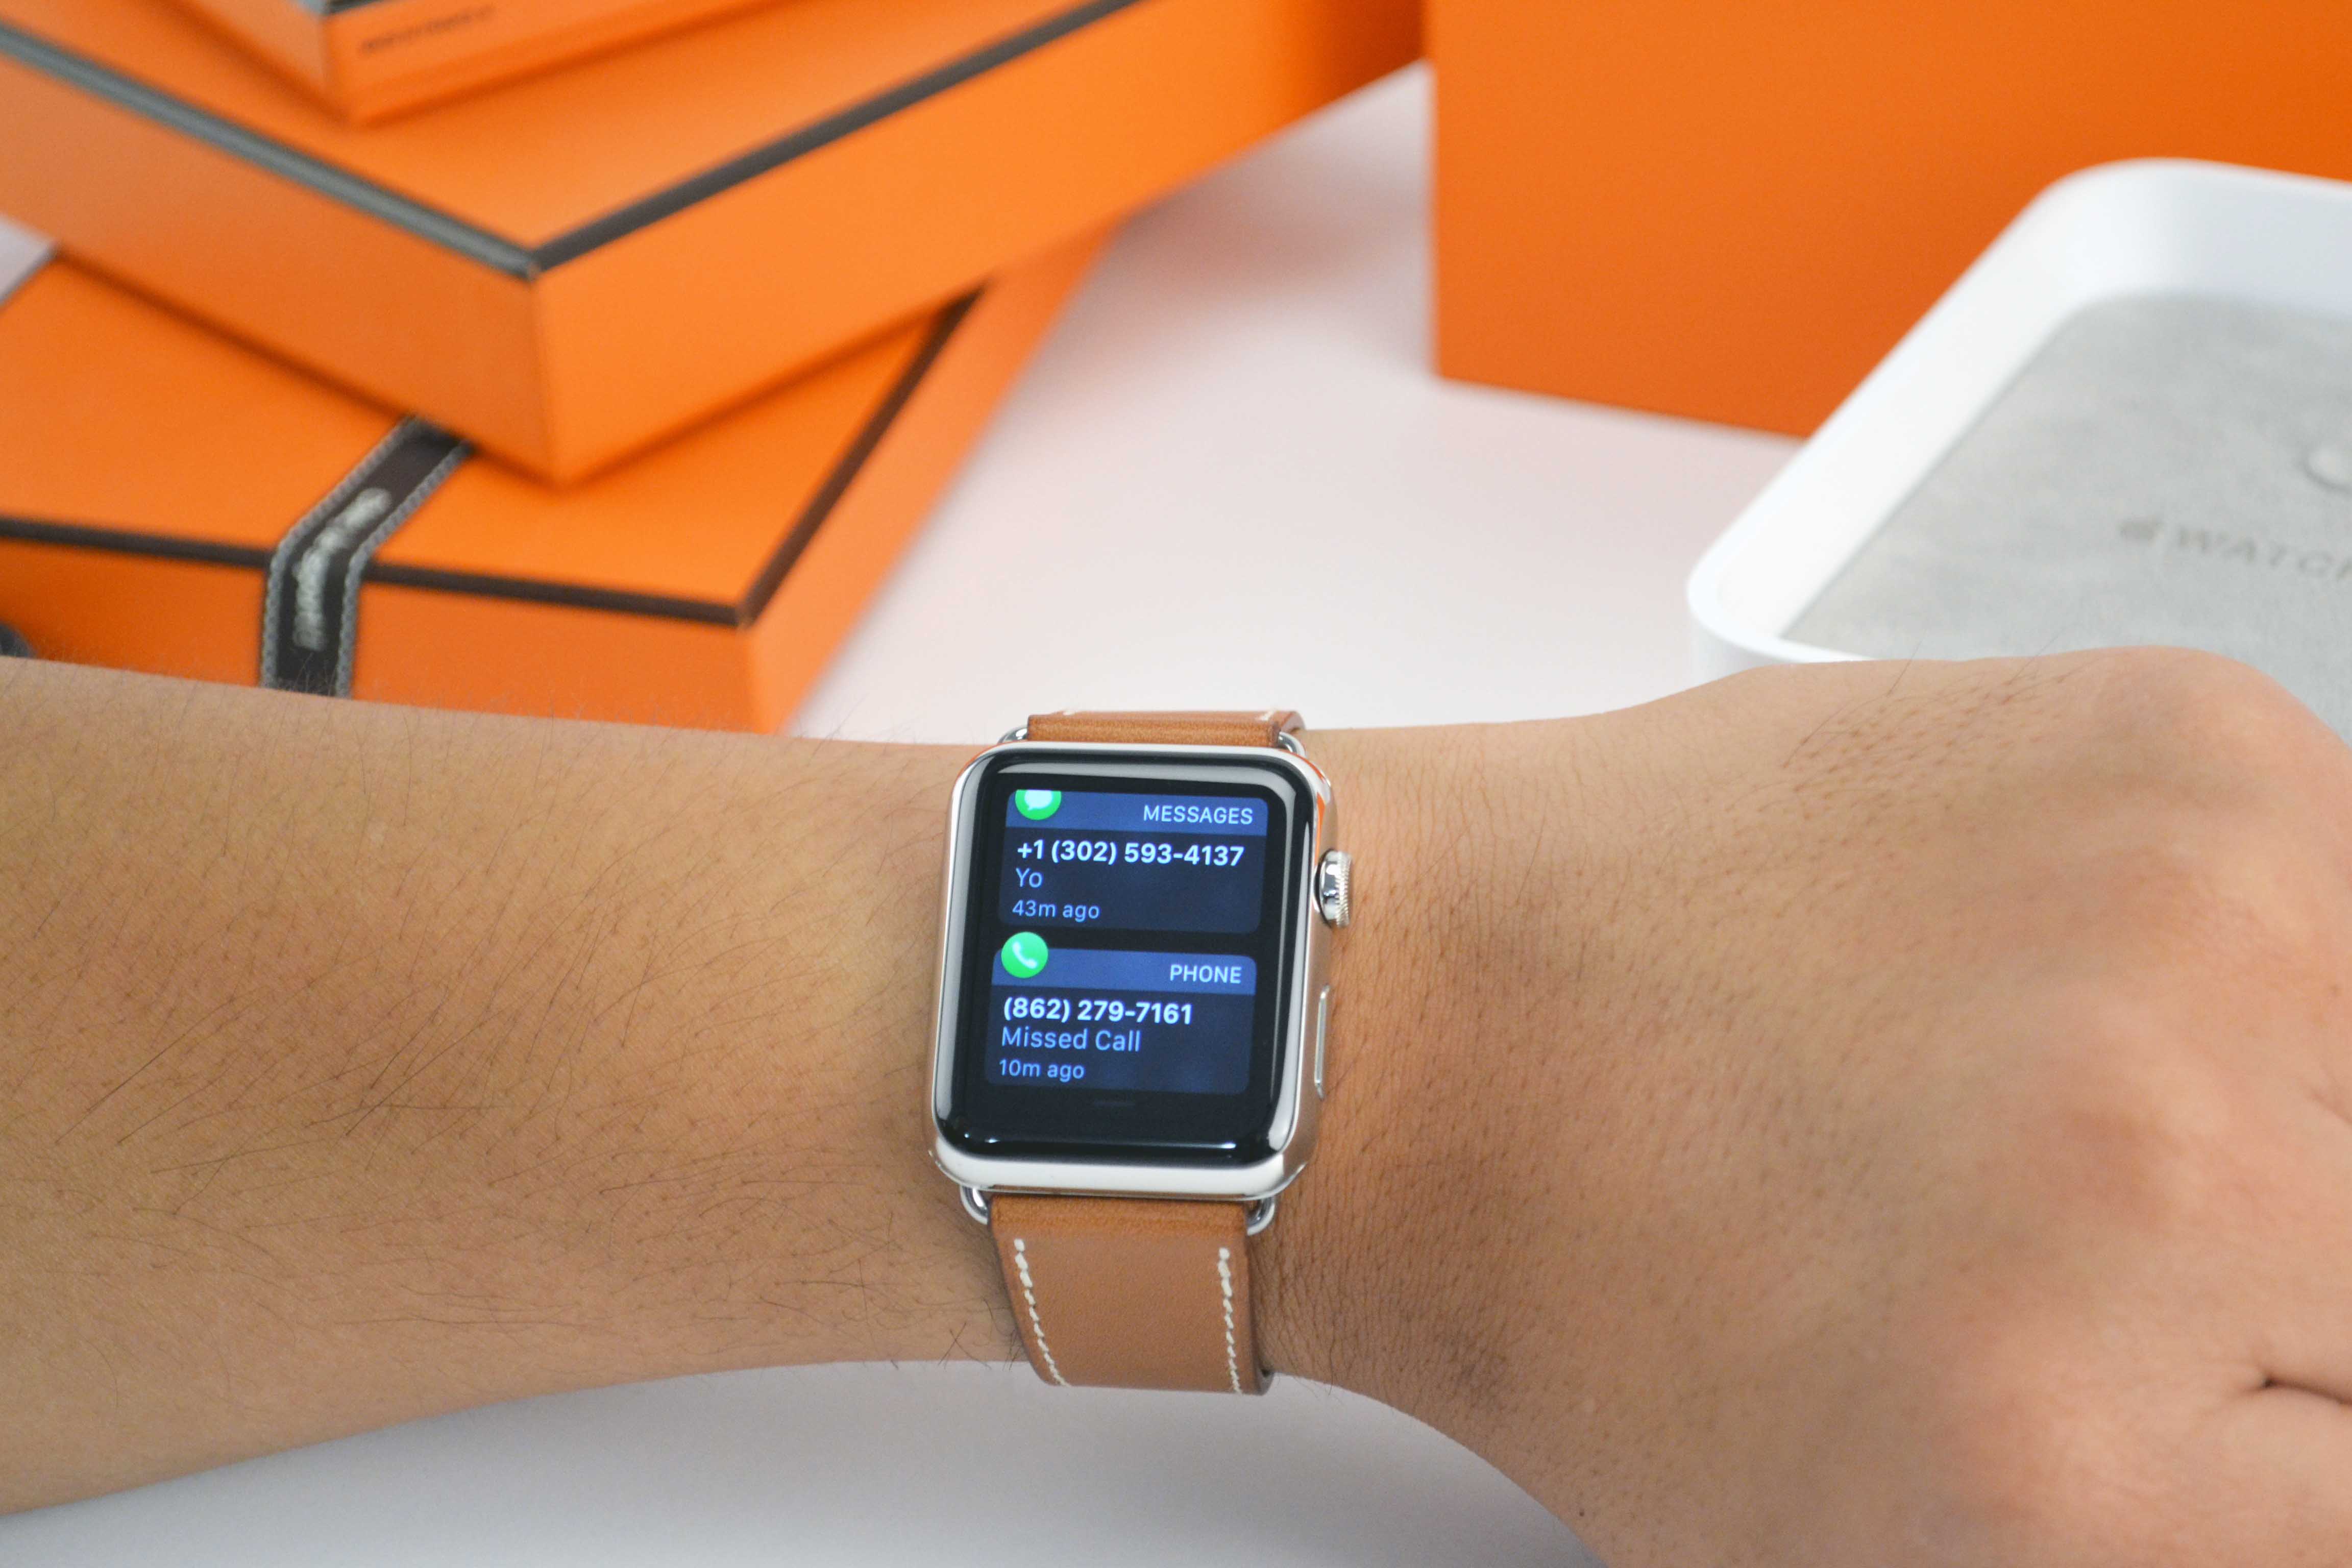 apple watch hermes review